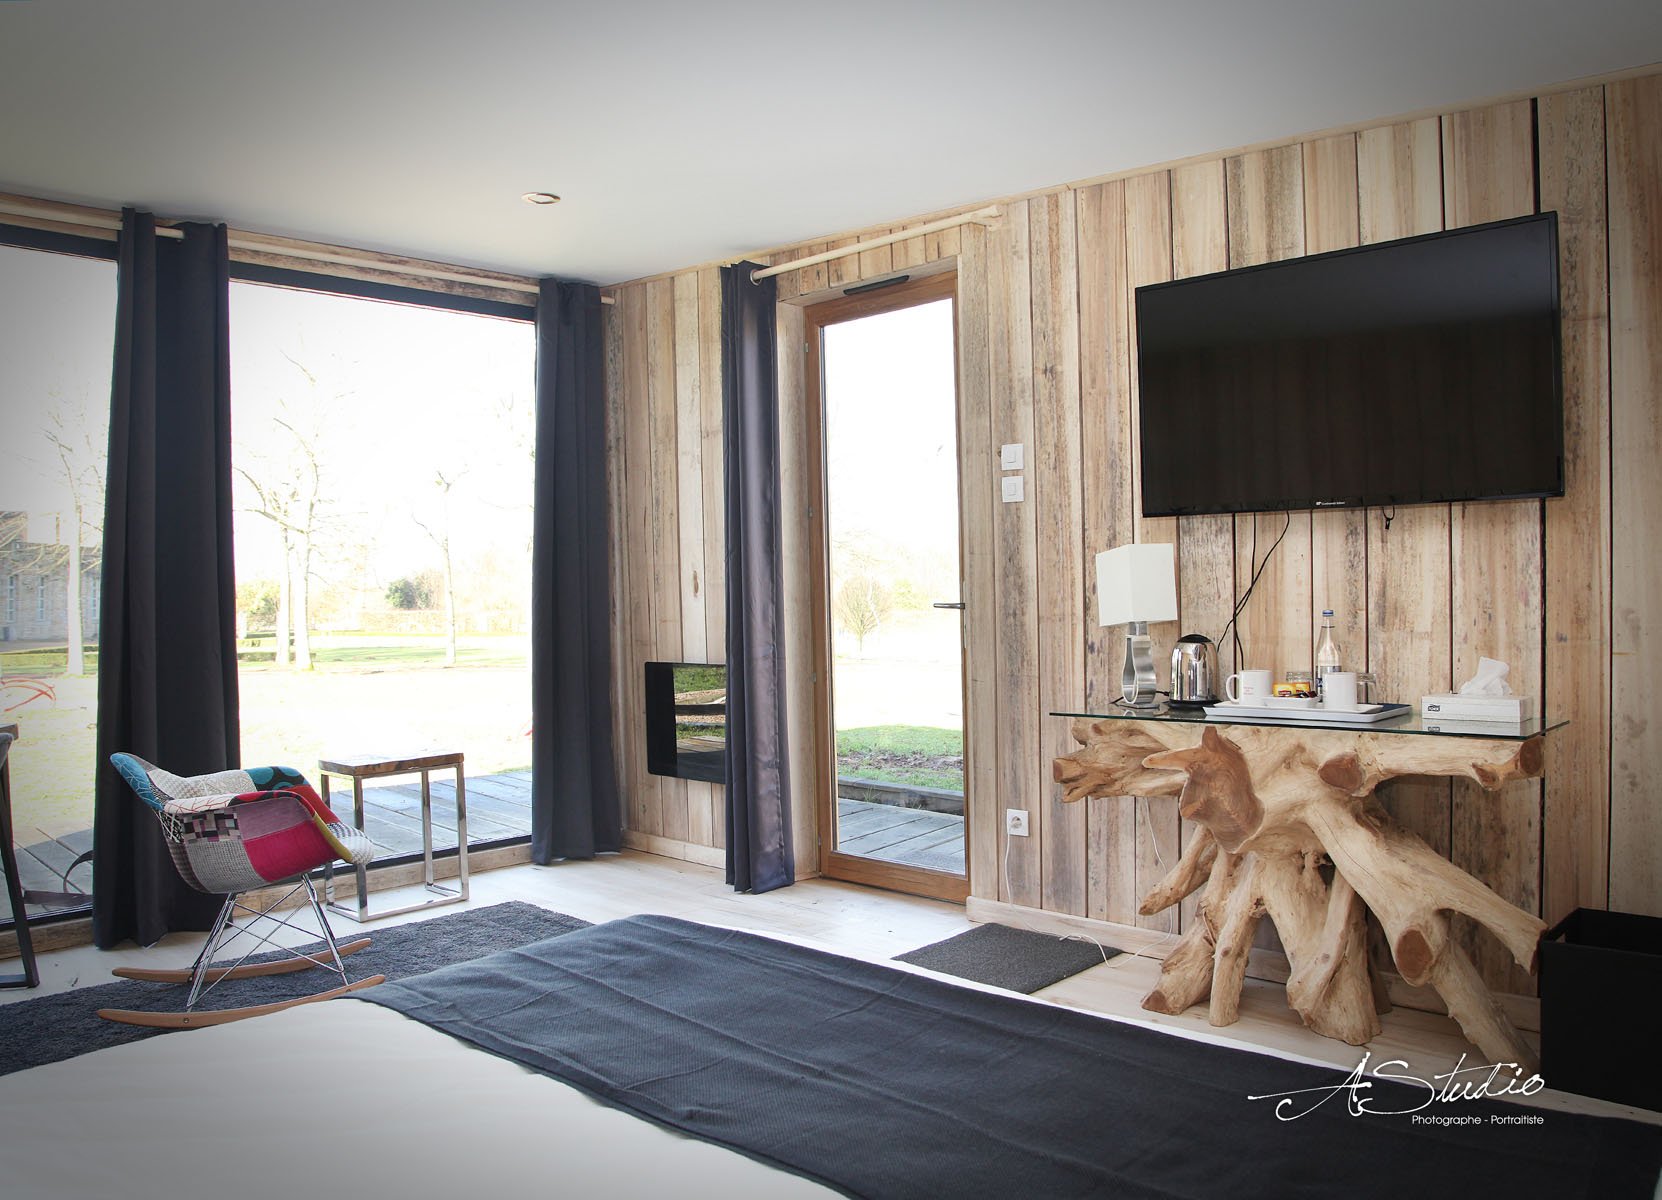 3/Chambres/Ecolodges/EcoLodge_suite-deluxe3.jpg